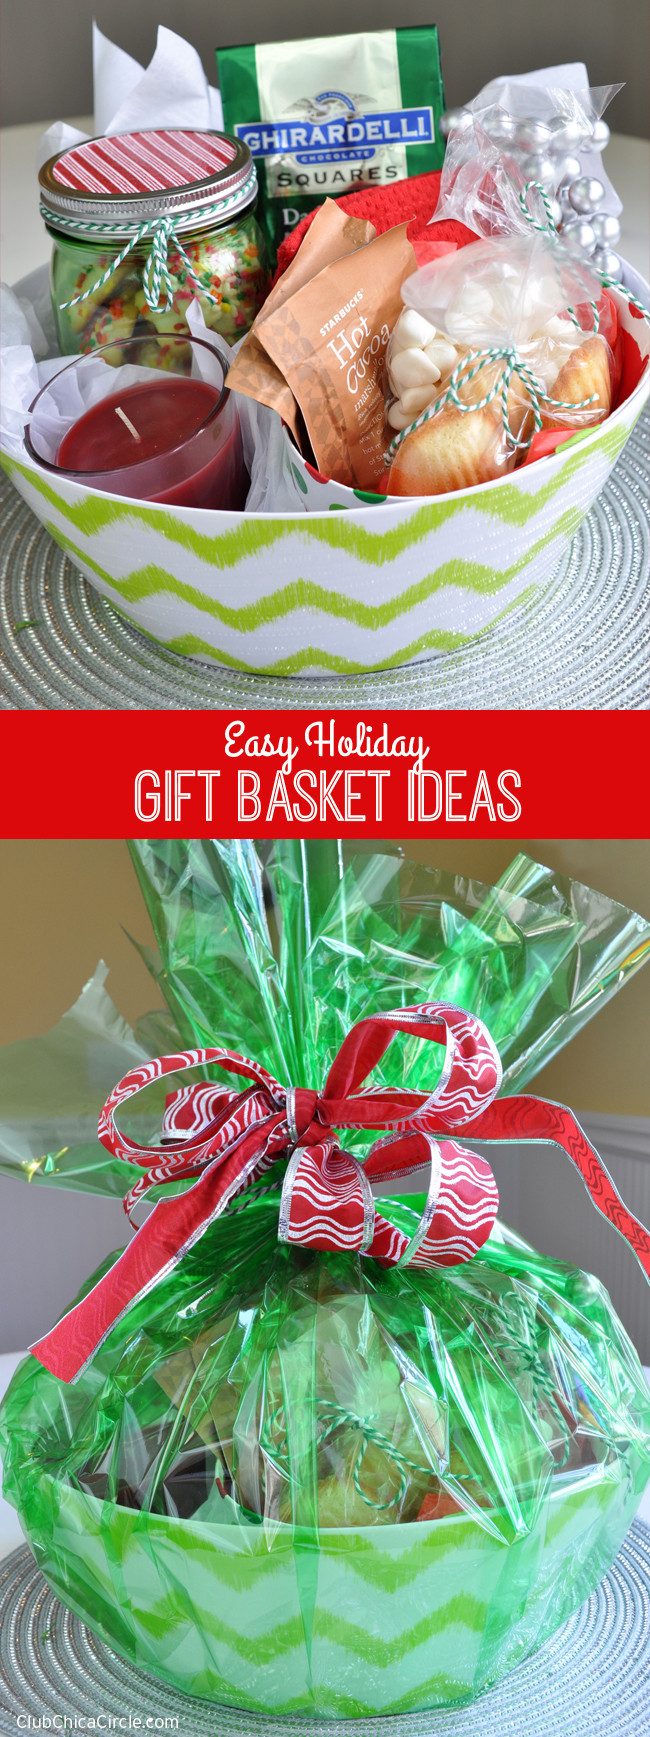 Easy Gift Baskets Ideas
 Easy Holiday Gift Basket Ideas Giveaway